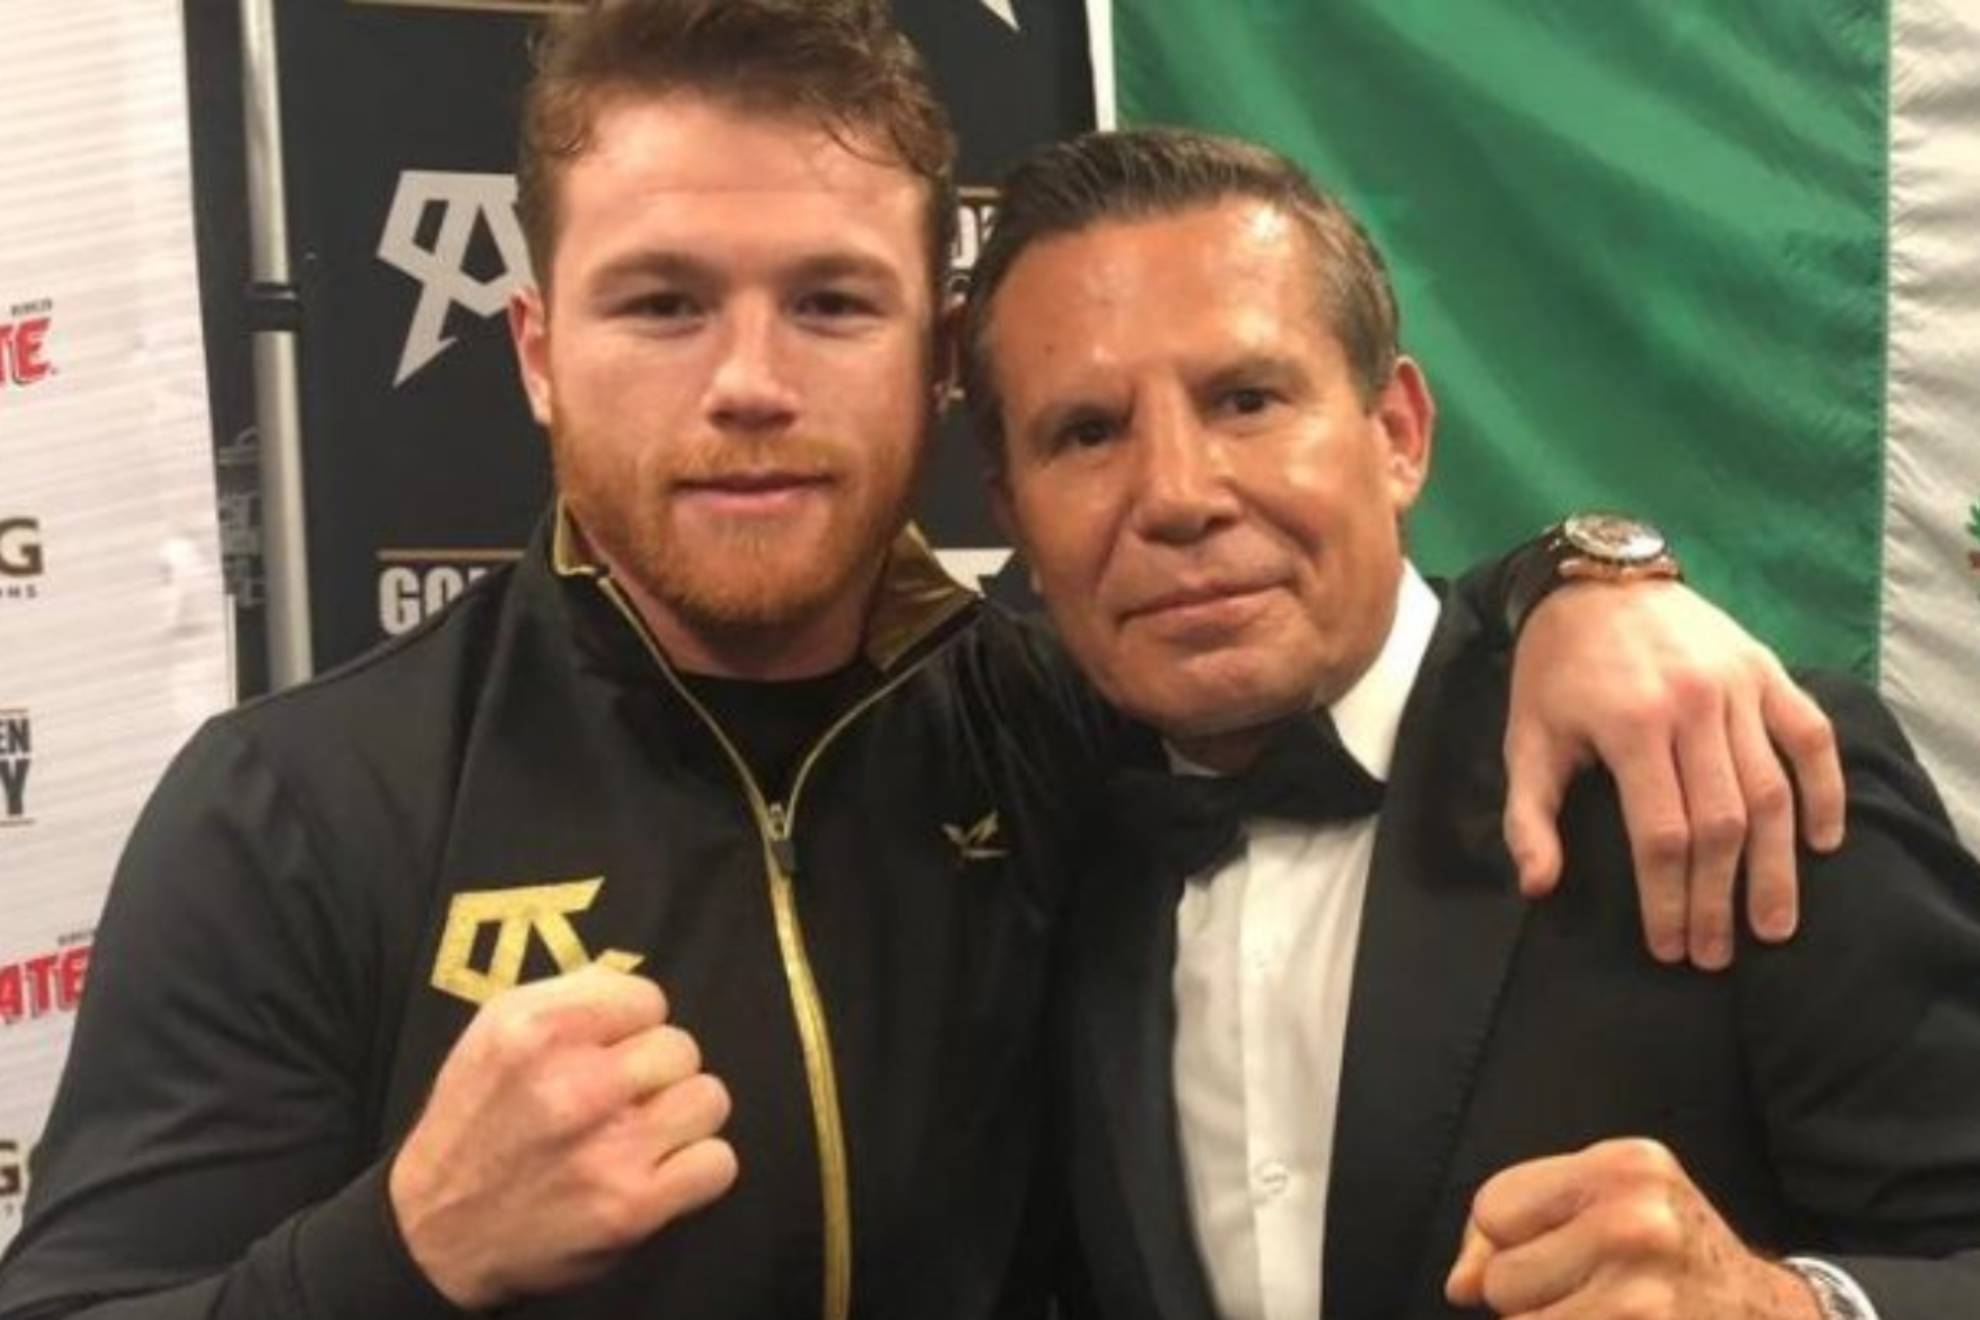 JC Chávez: Im worried about Canelo getting in the ring angry